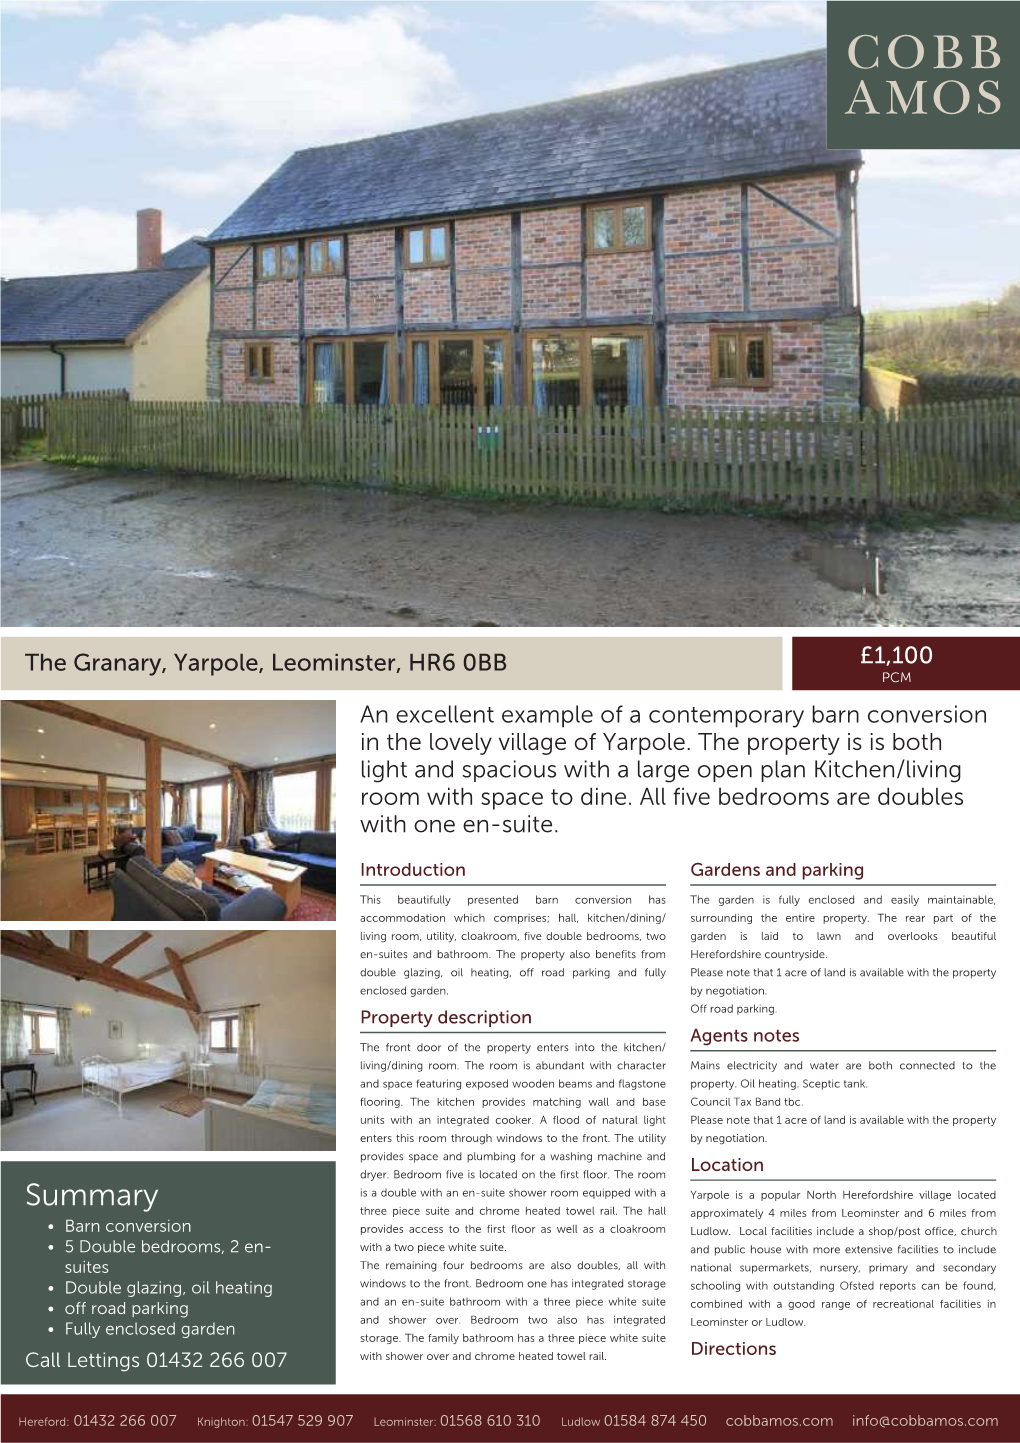 The Granary, Yarpole, Leominster, HR6 0BB £1,100 PCM an Excellent Example of a Contemporary Barn Conversion in the Lovely Village of Yarpole